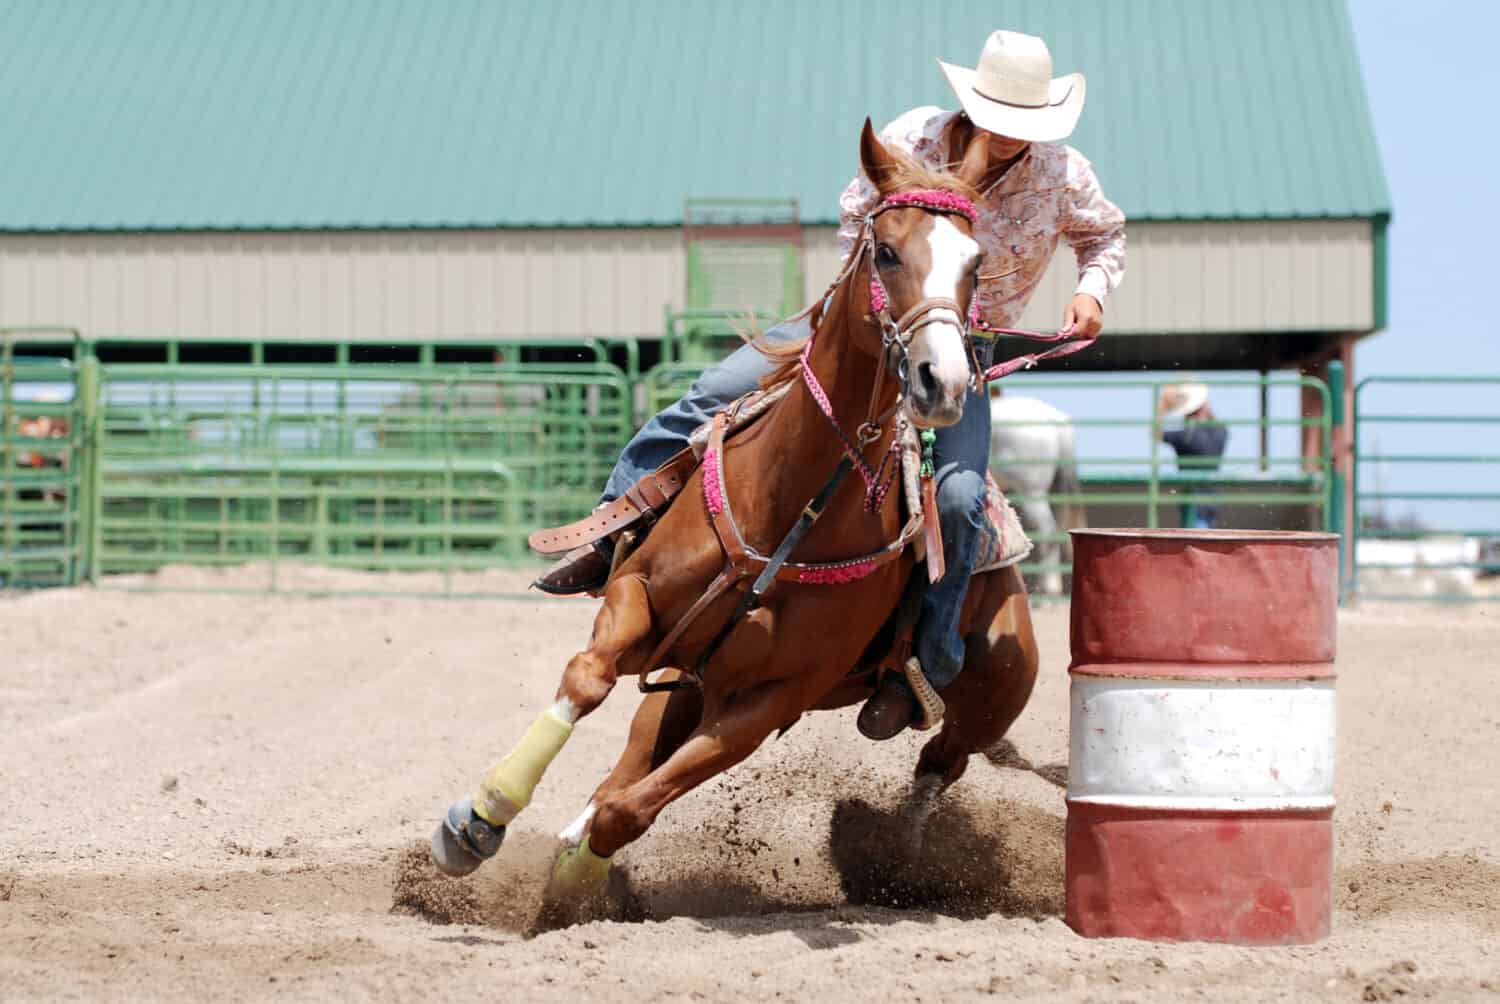 Cowgirl racing her horse between poles during a rodeo.